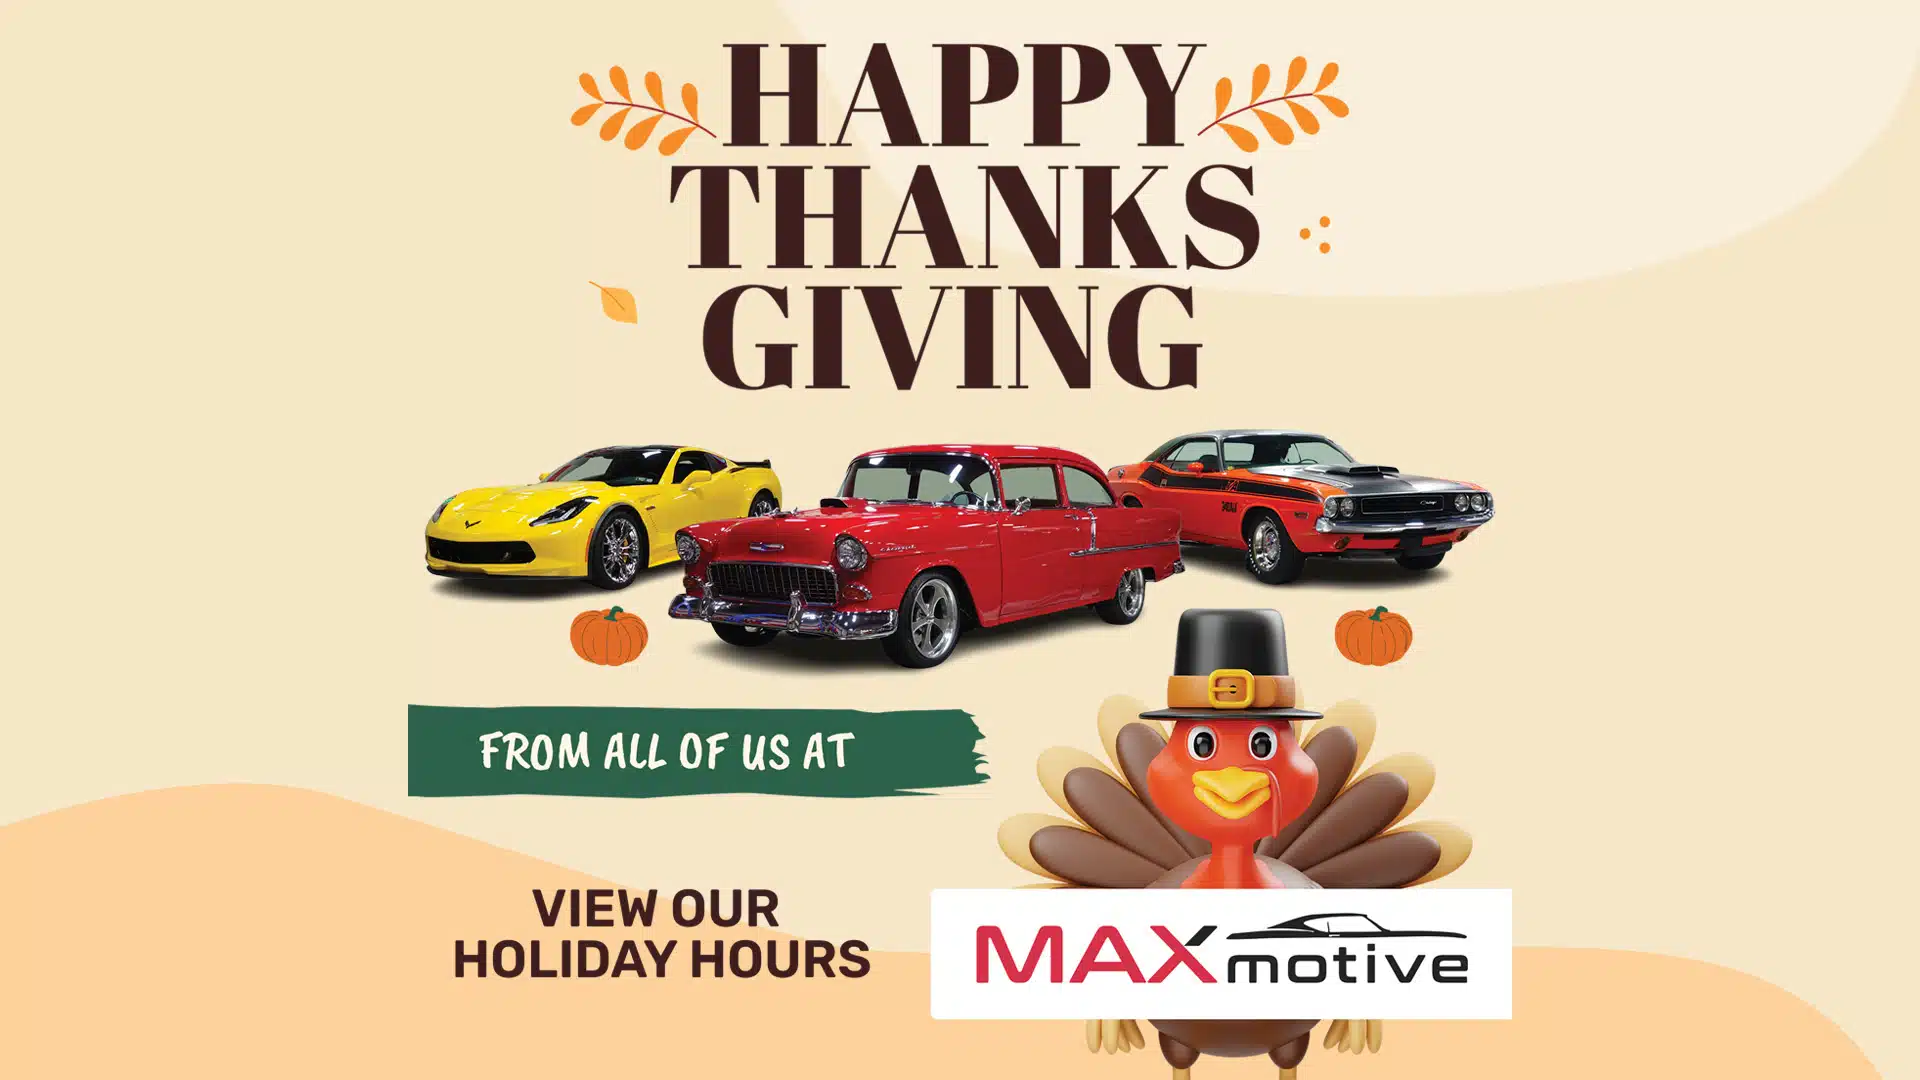 Thanksgiving Hours